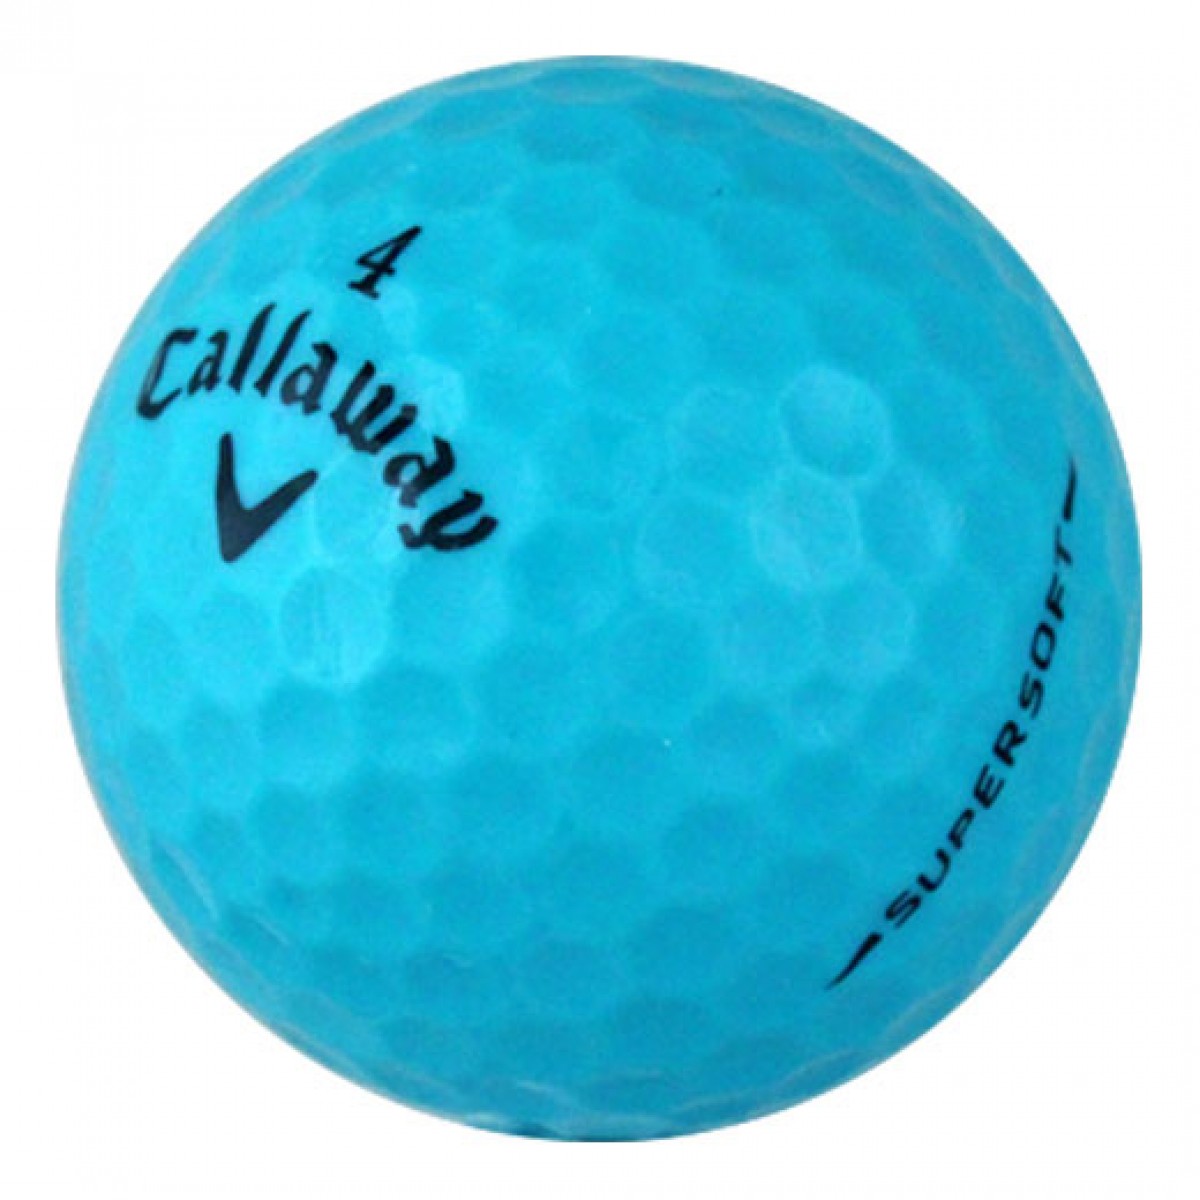 Callaway Supersoft Teal used golf balls